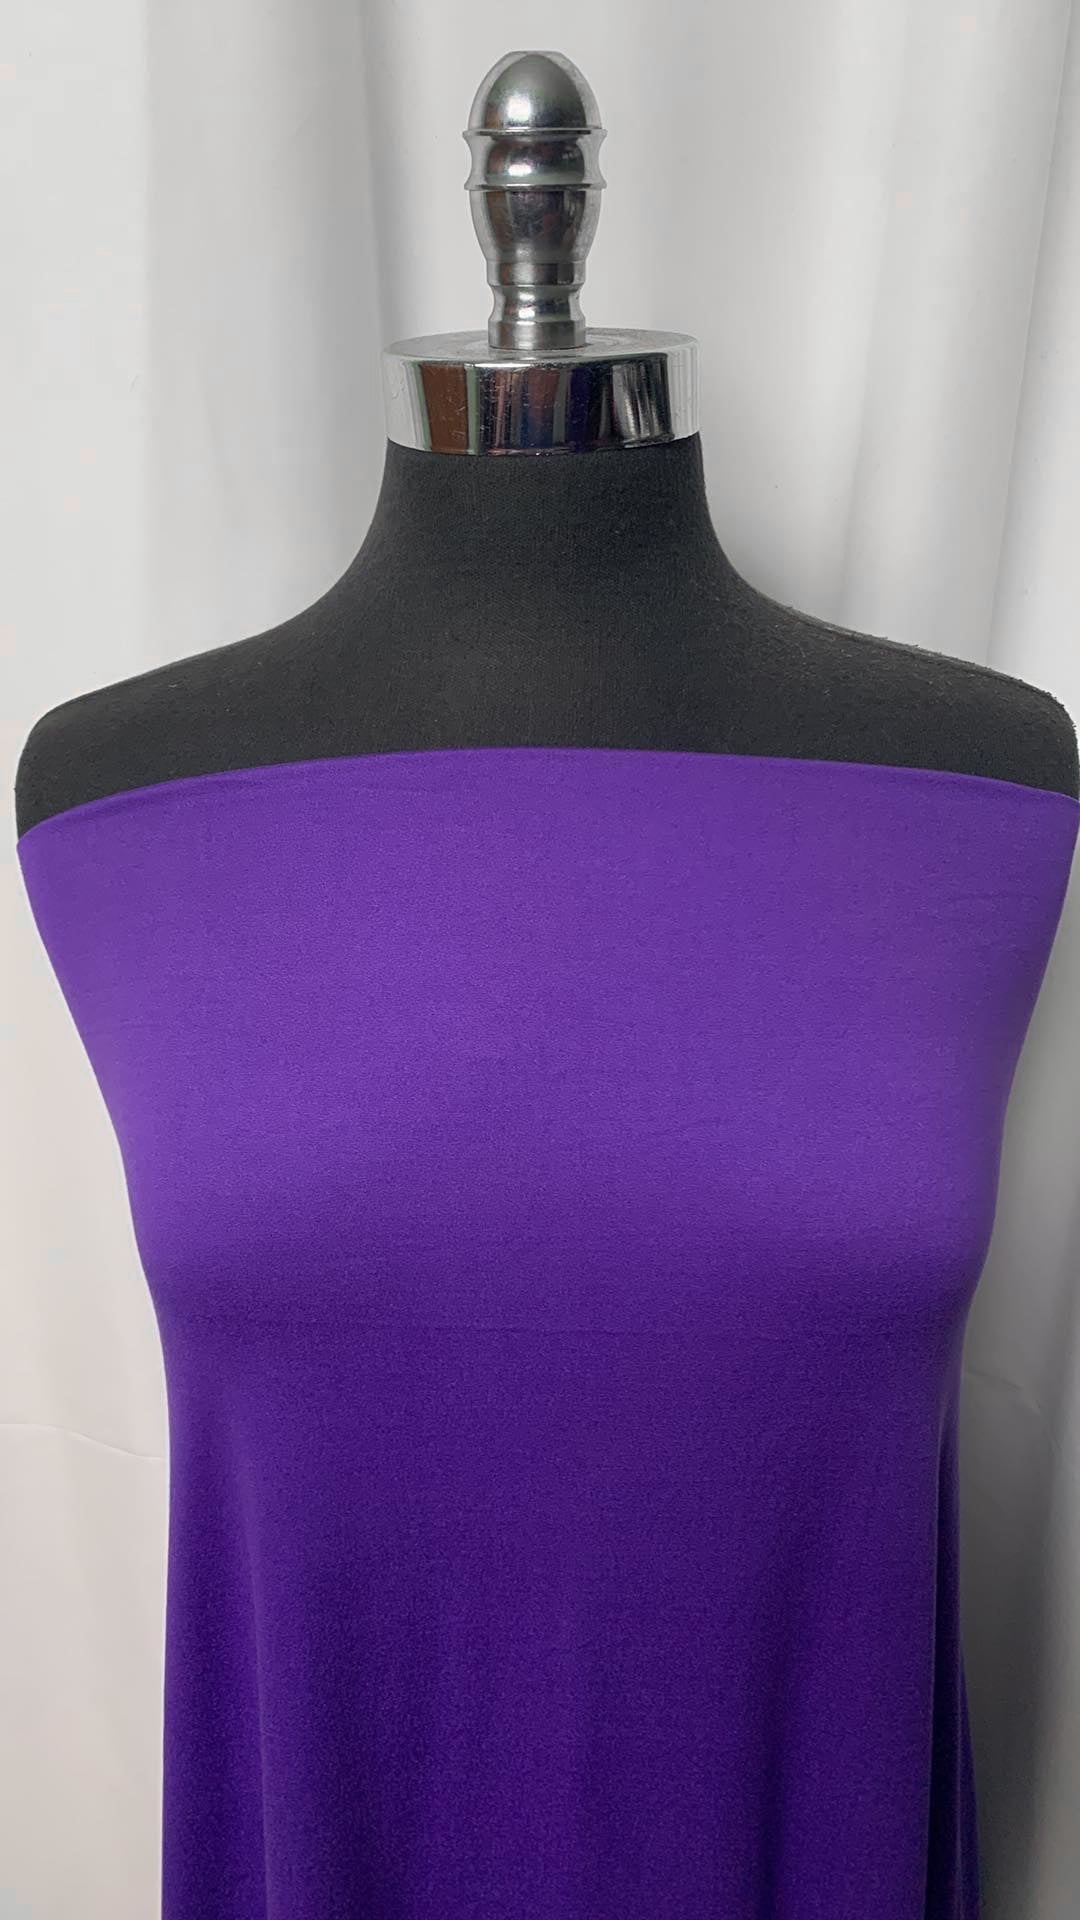 Solid Purple - Double Brushed Poly Spandex - 2 Yard Cut